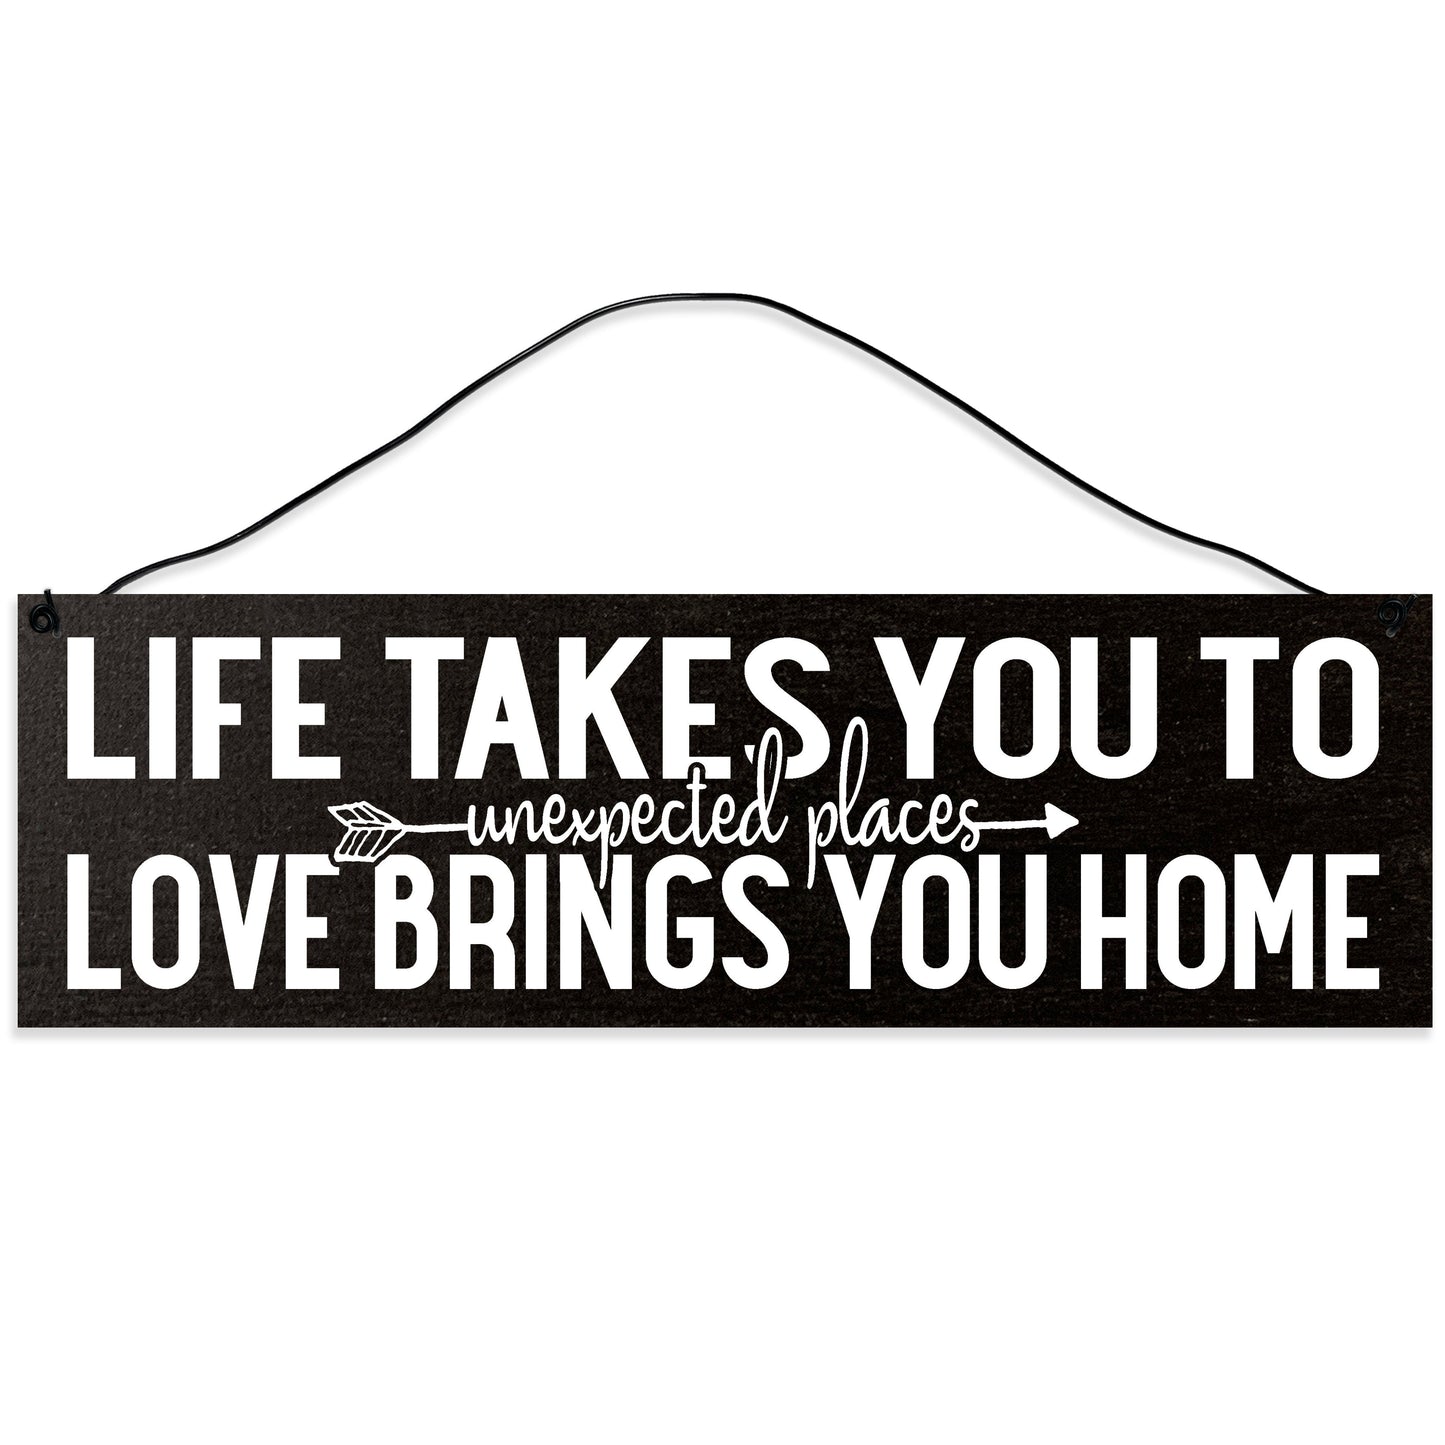 Sawyer's Mill - Life Takes You to Unexpected Places, Love Brings You Home. Wood Sign for Home or Office. Measures 3x10 inches.